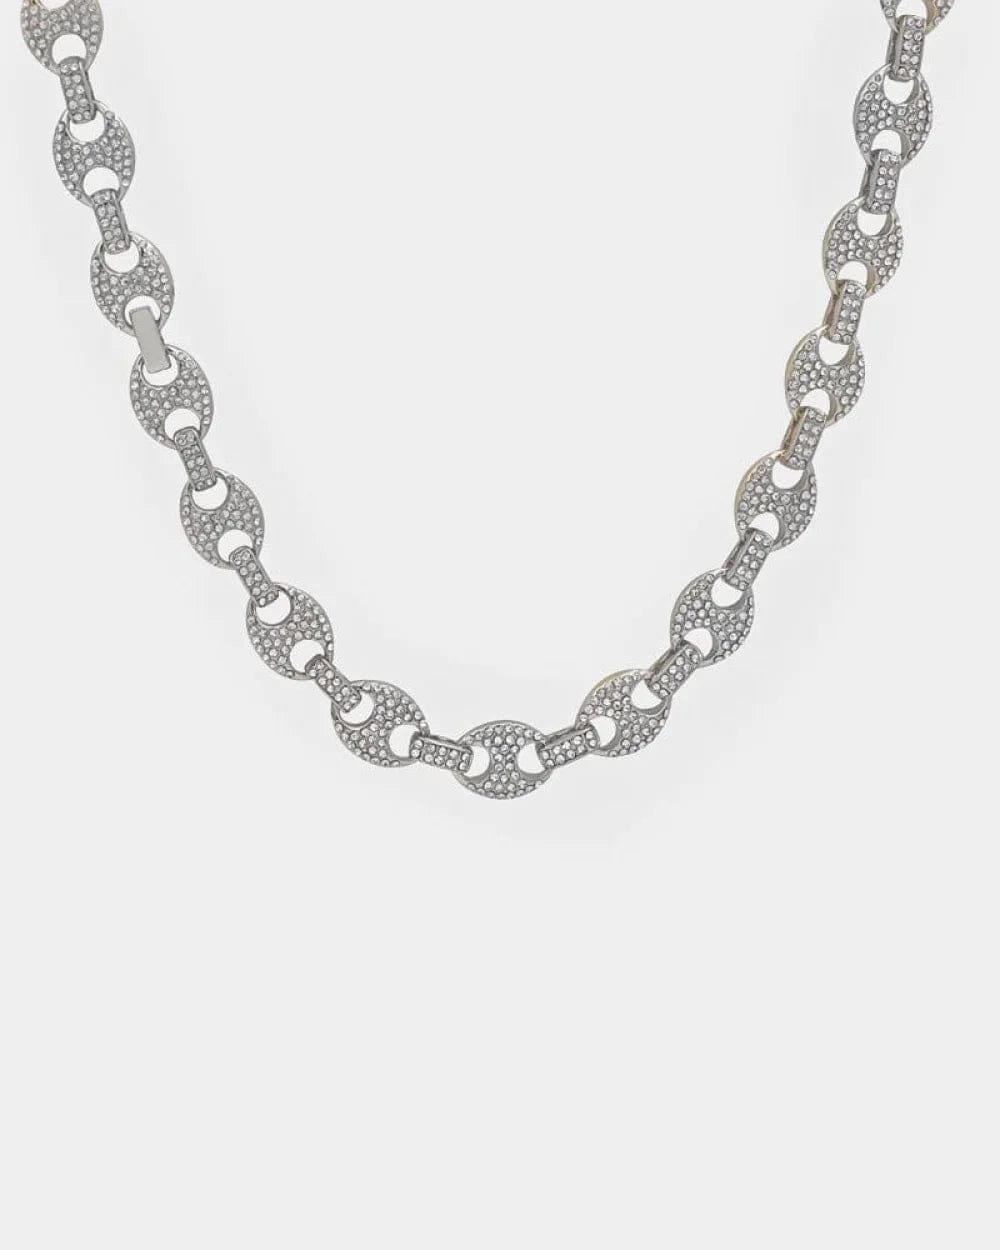 Chain 12 MM Oval Link Chain - White Gold